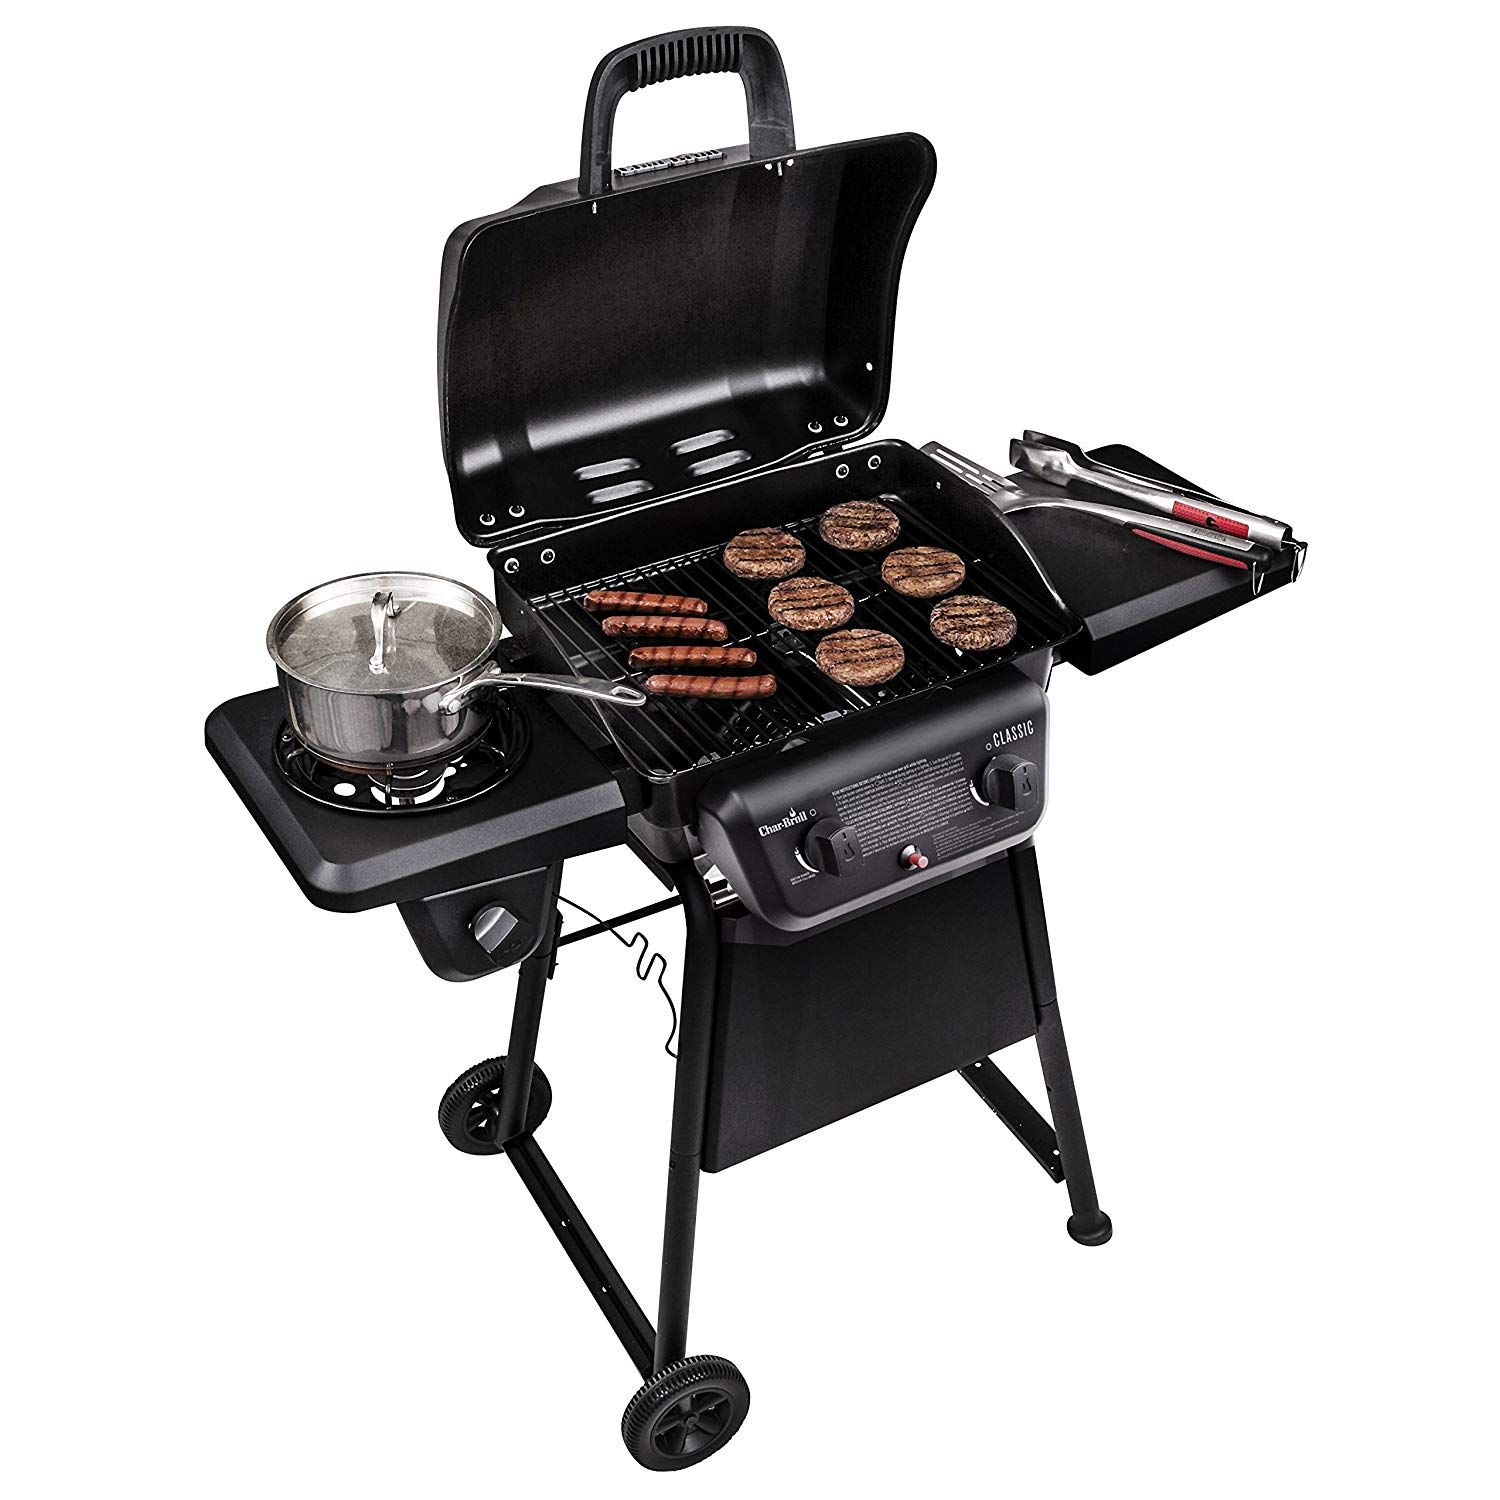 Stainless BBQ Grill - Buy Electric, Charcoal and Propane Grills At Best Prices